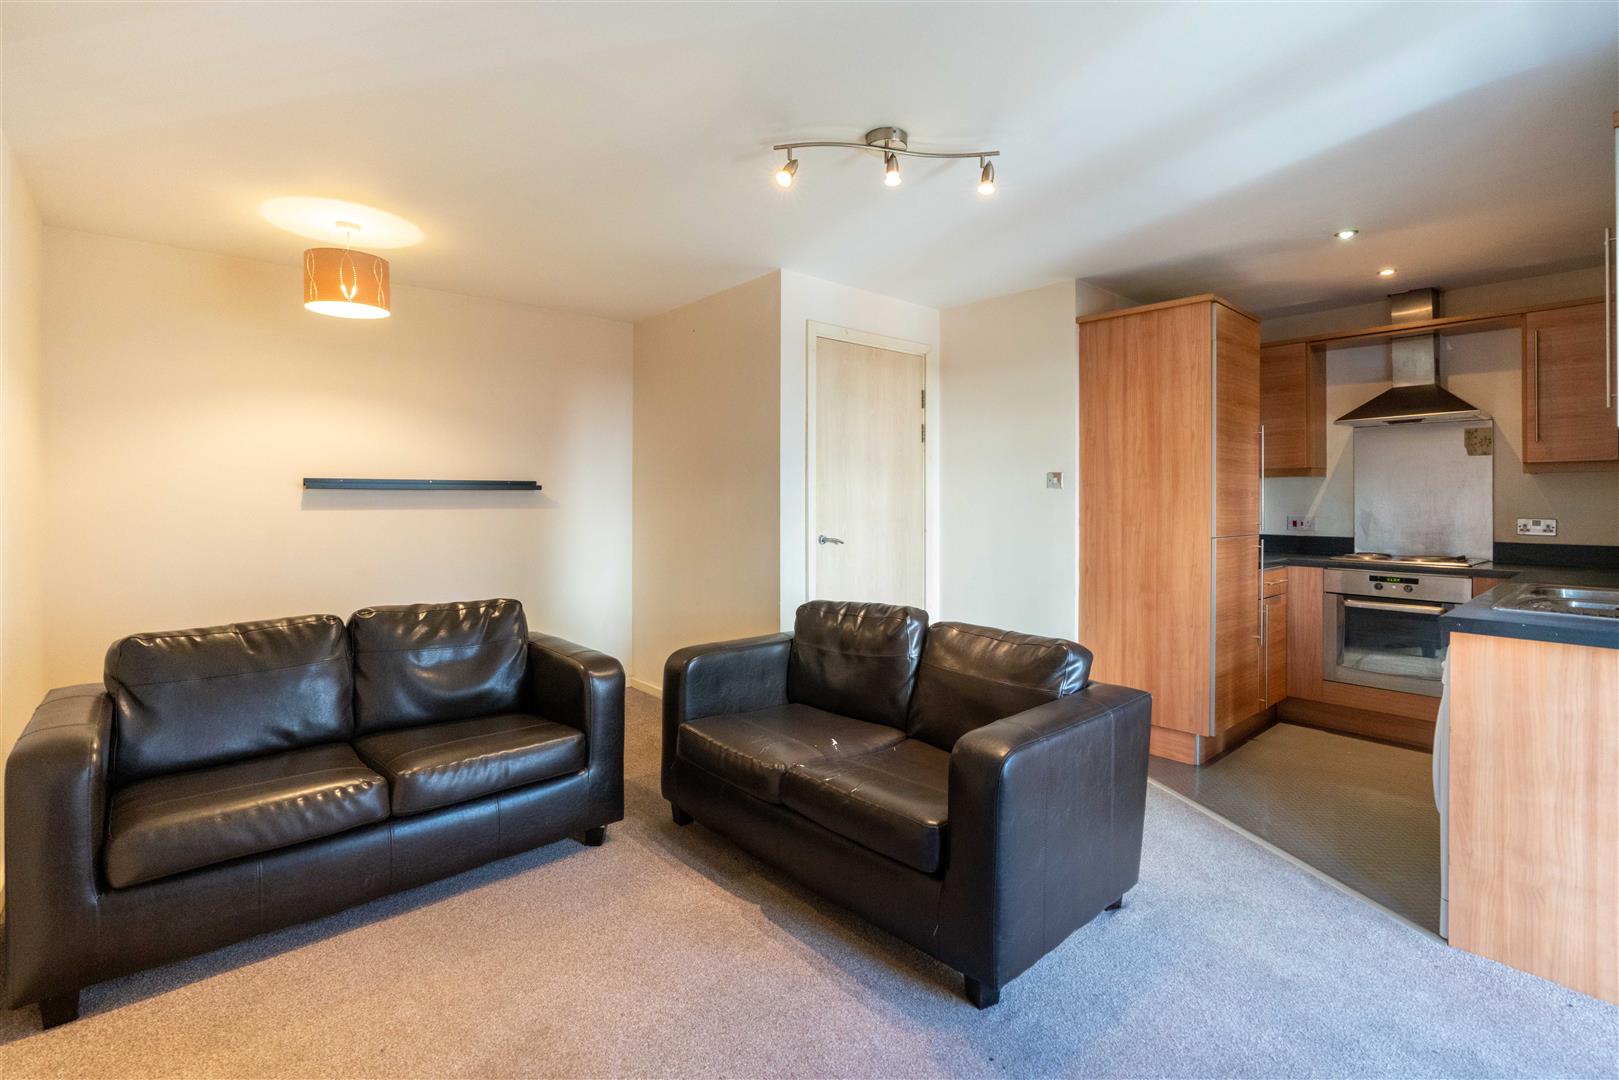 3 bed apartment to rent in Melbourne Street, City Centre, NE1 